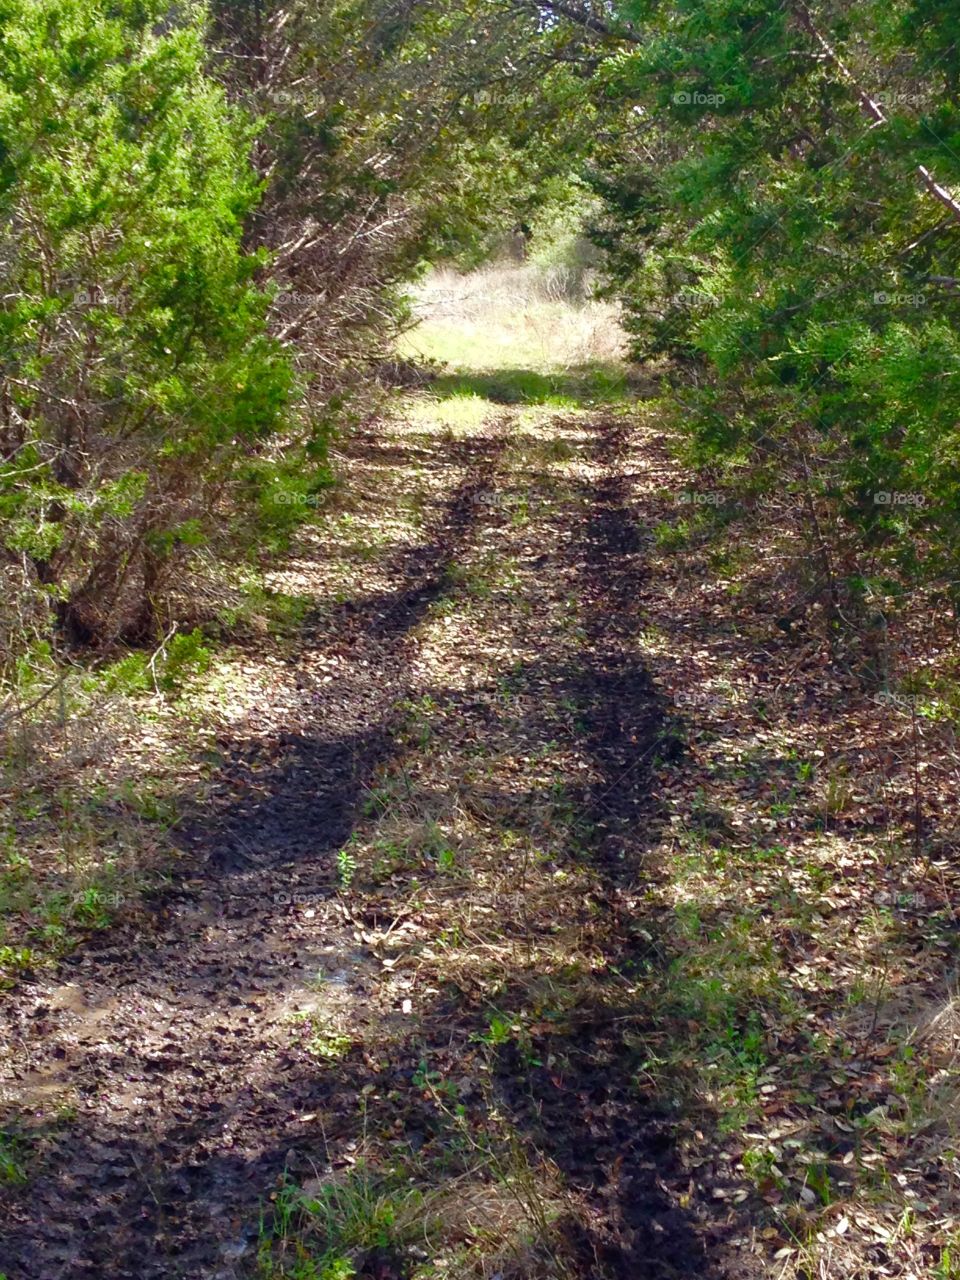 Pathway in the woods made by our Polaris four wheeler.